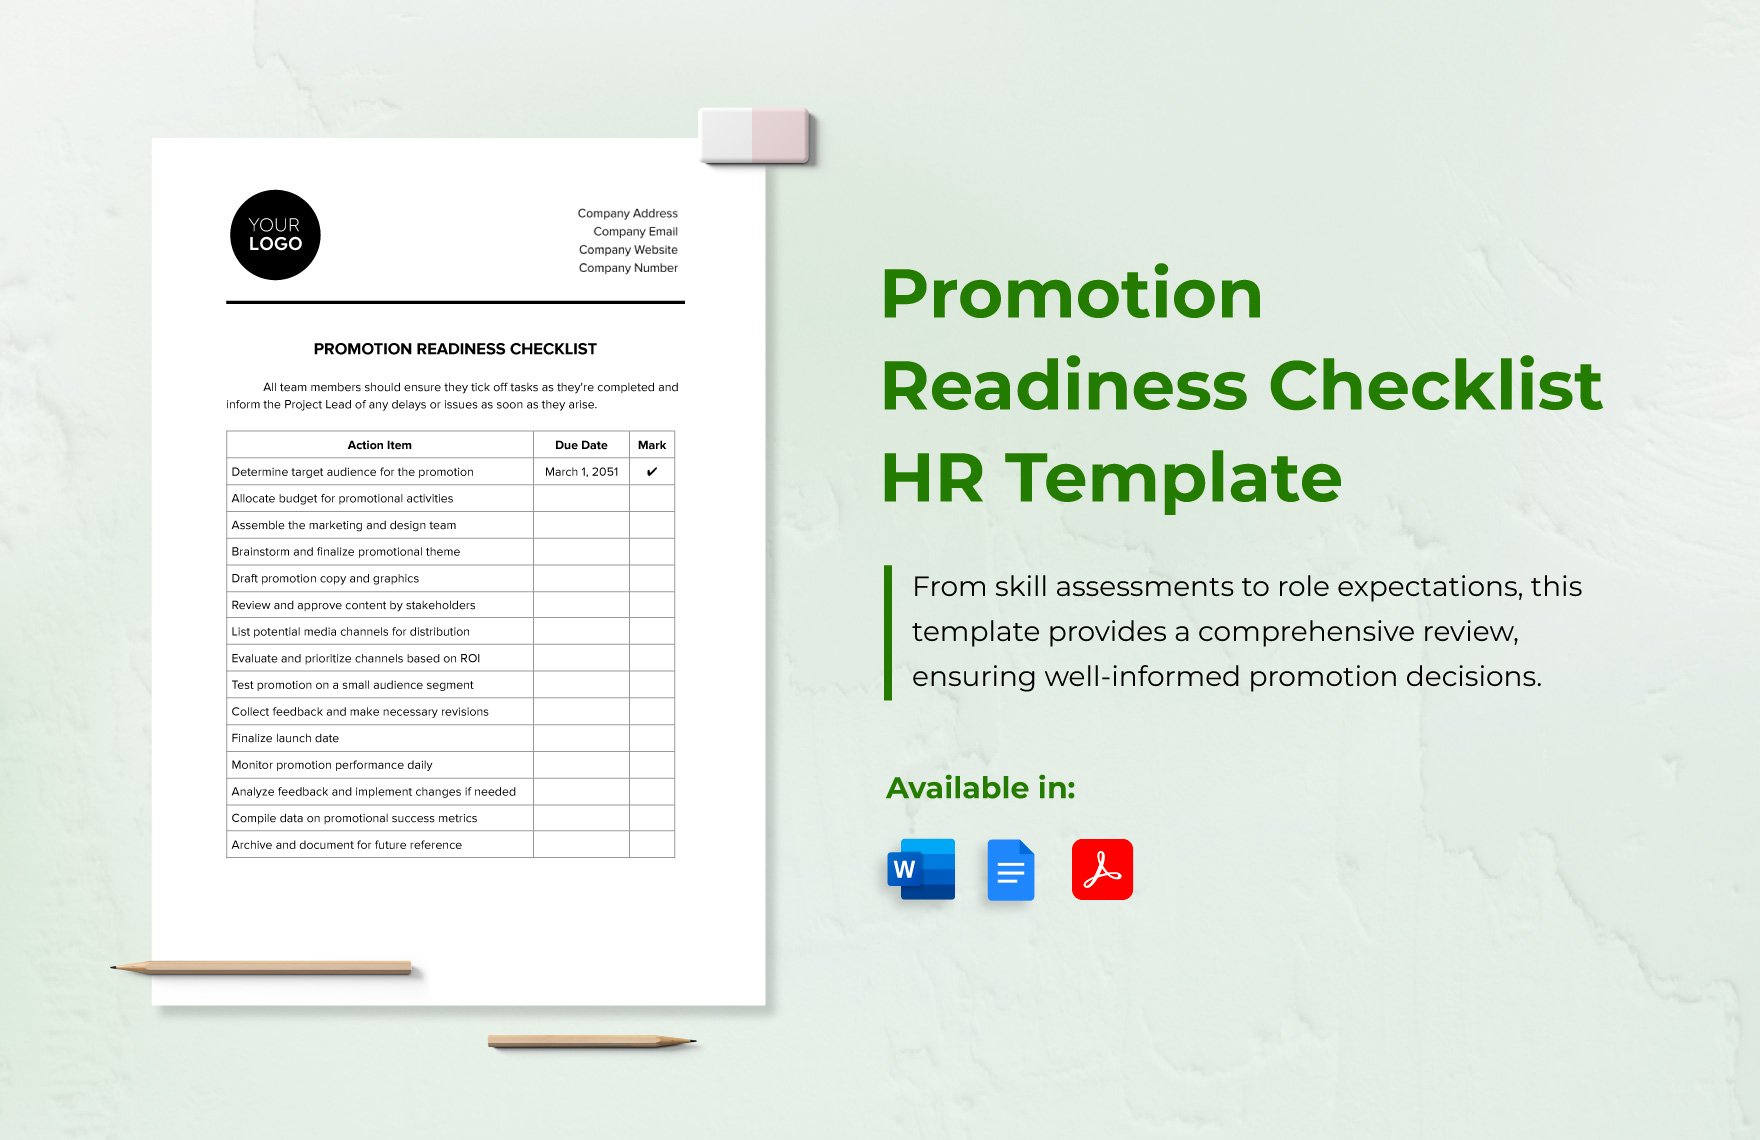 Promotion Readiness Checklist HR Template